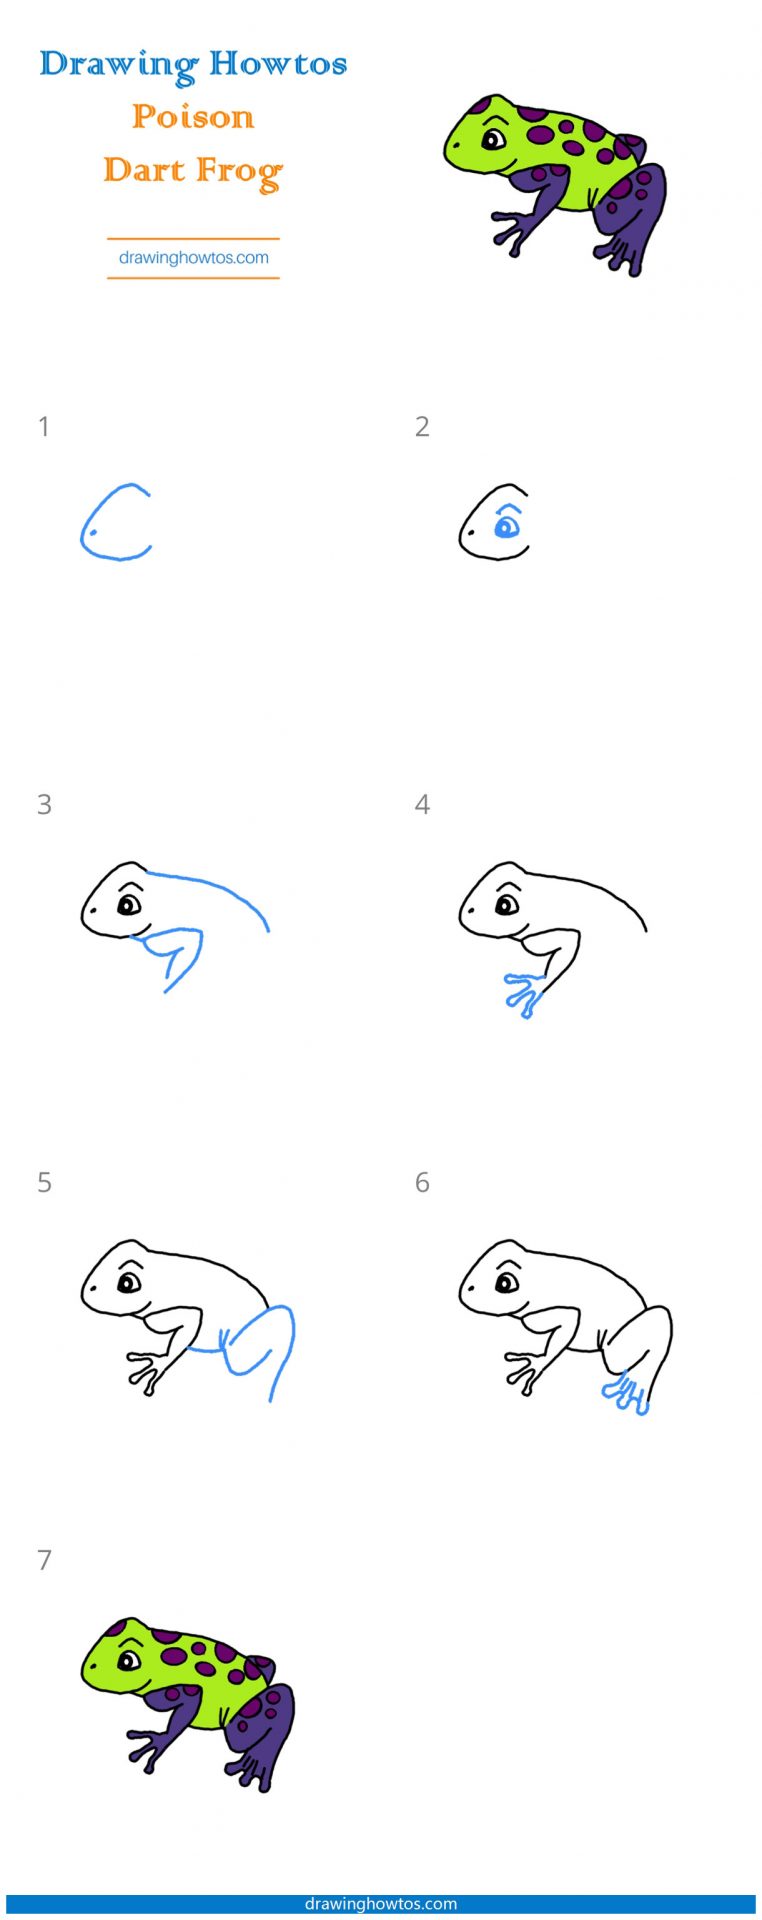 How to Draw a Poison Dart Frog Step by Step